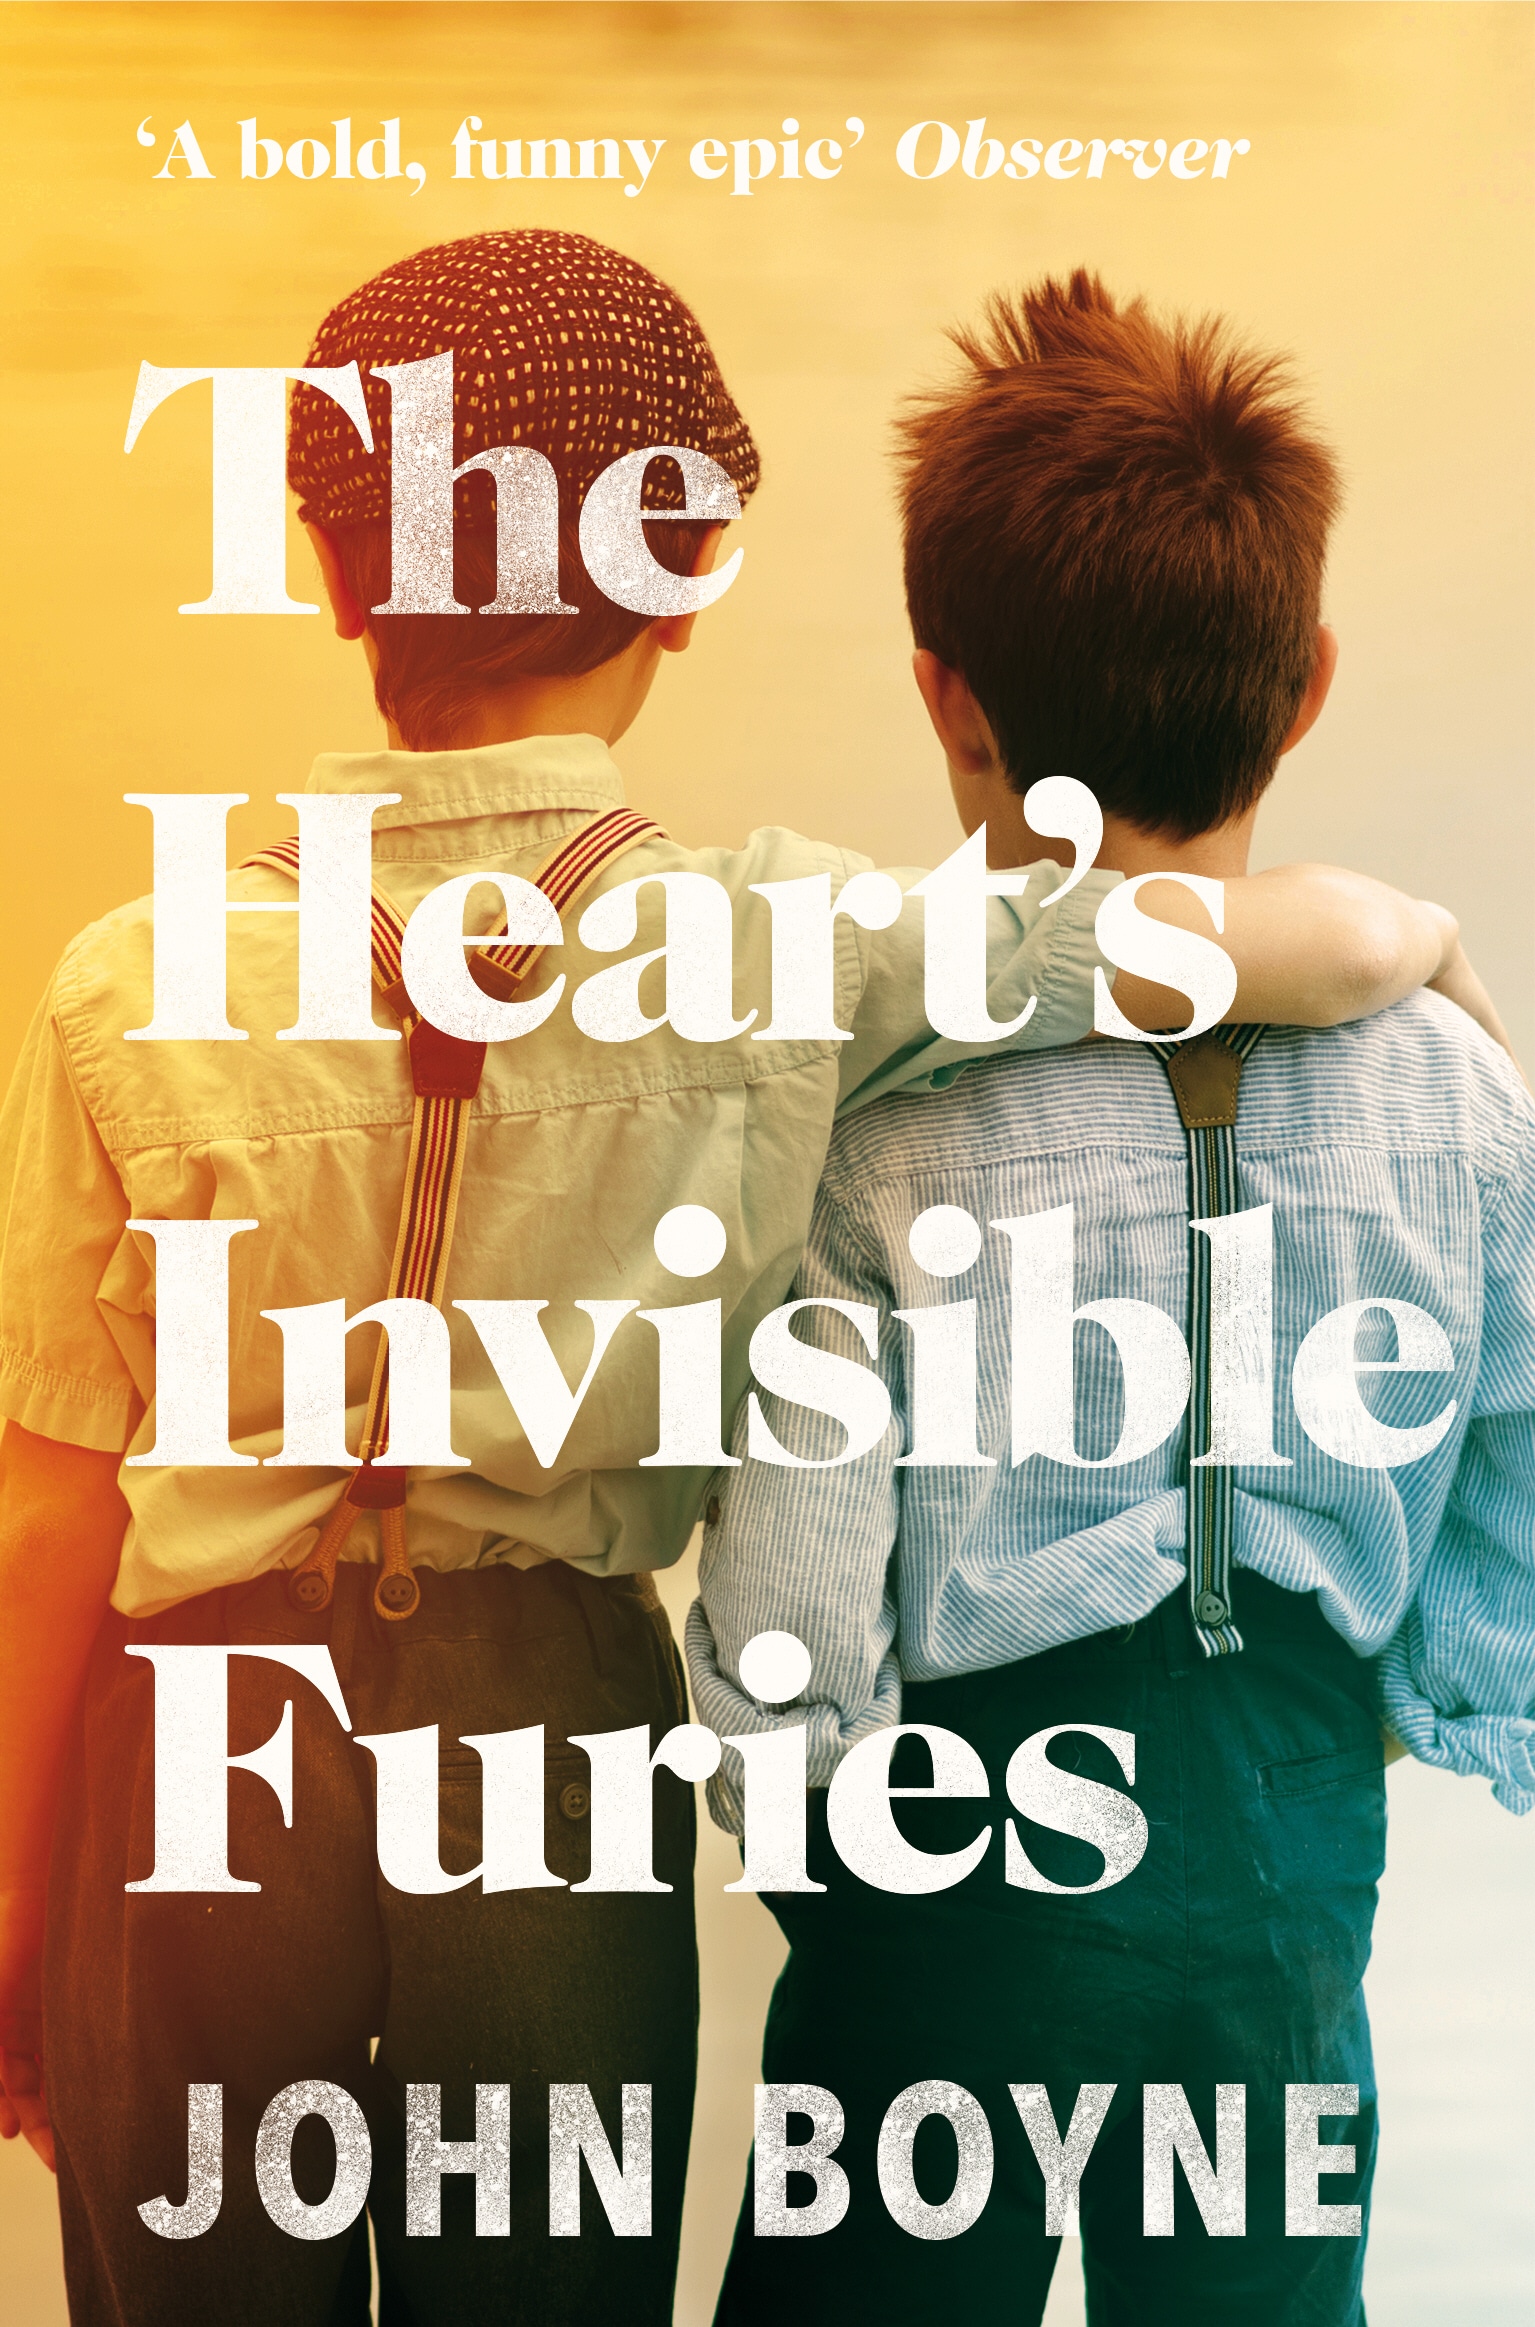 Book “The Heart's Invisible Furies” by John Boyne — December 14, 2017